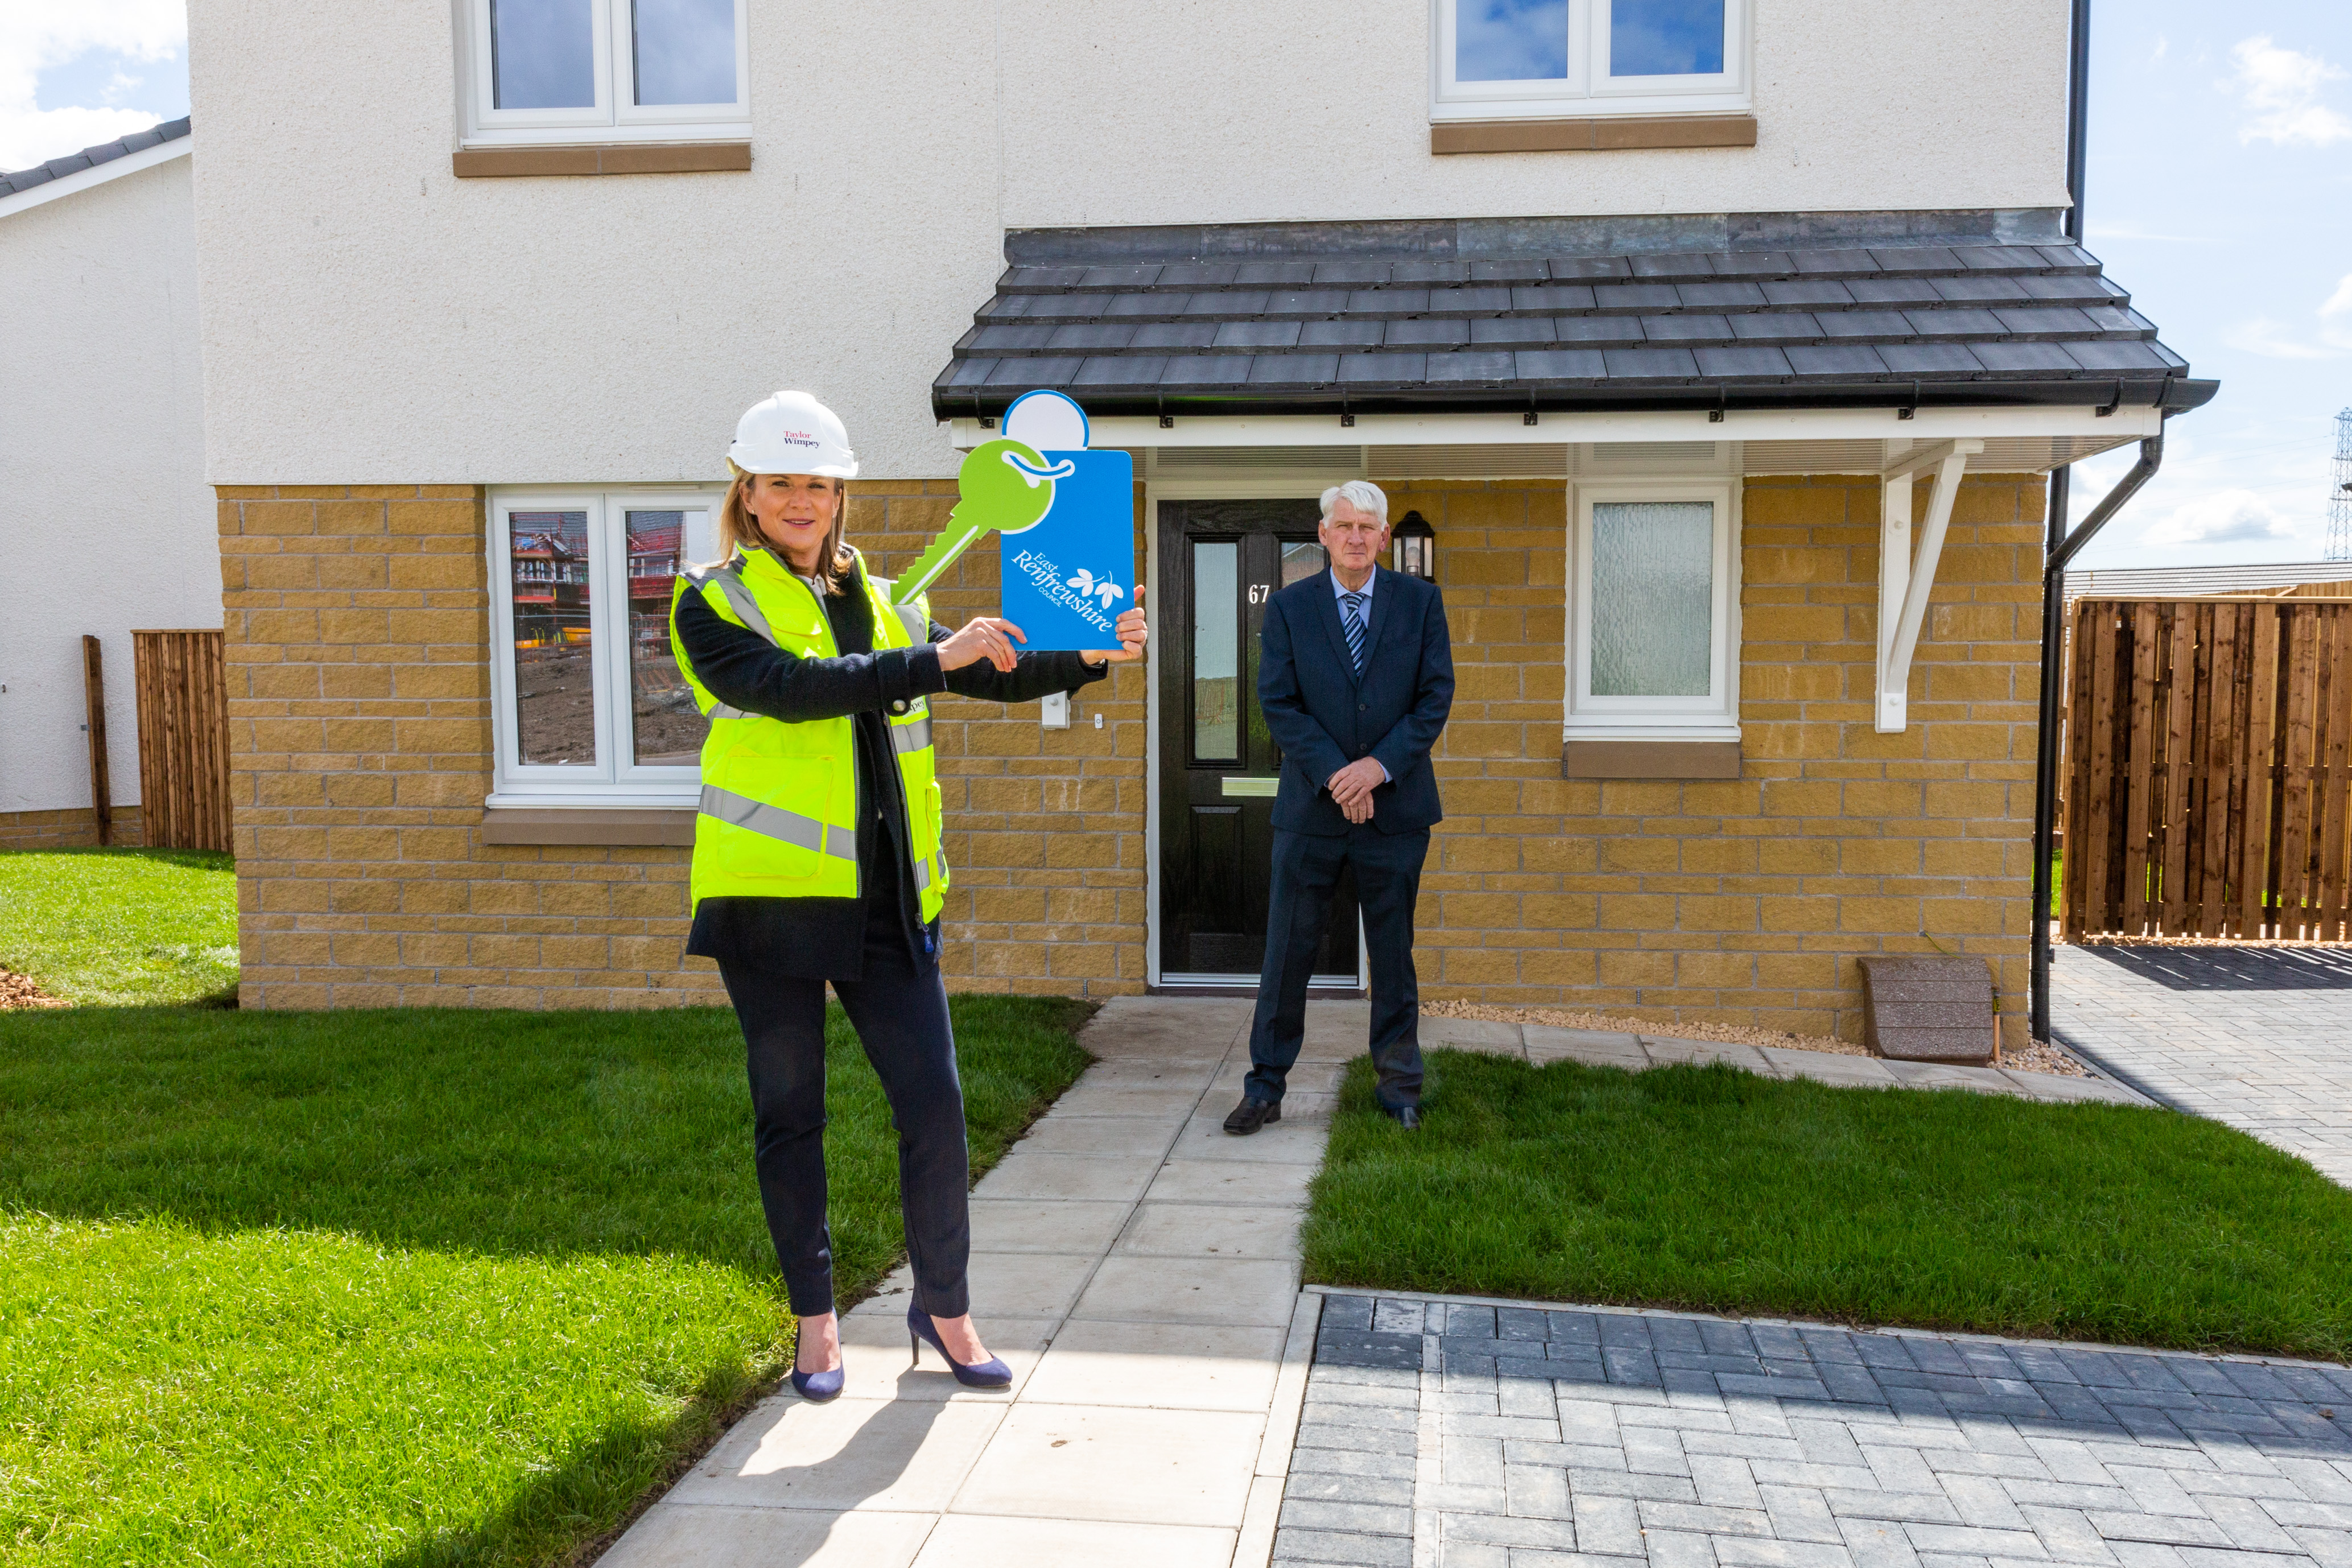 Taylor Wimpey completes handover of 82 affordable homes in Maidenhill